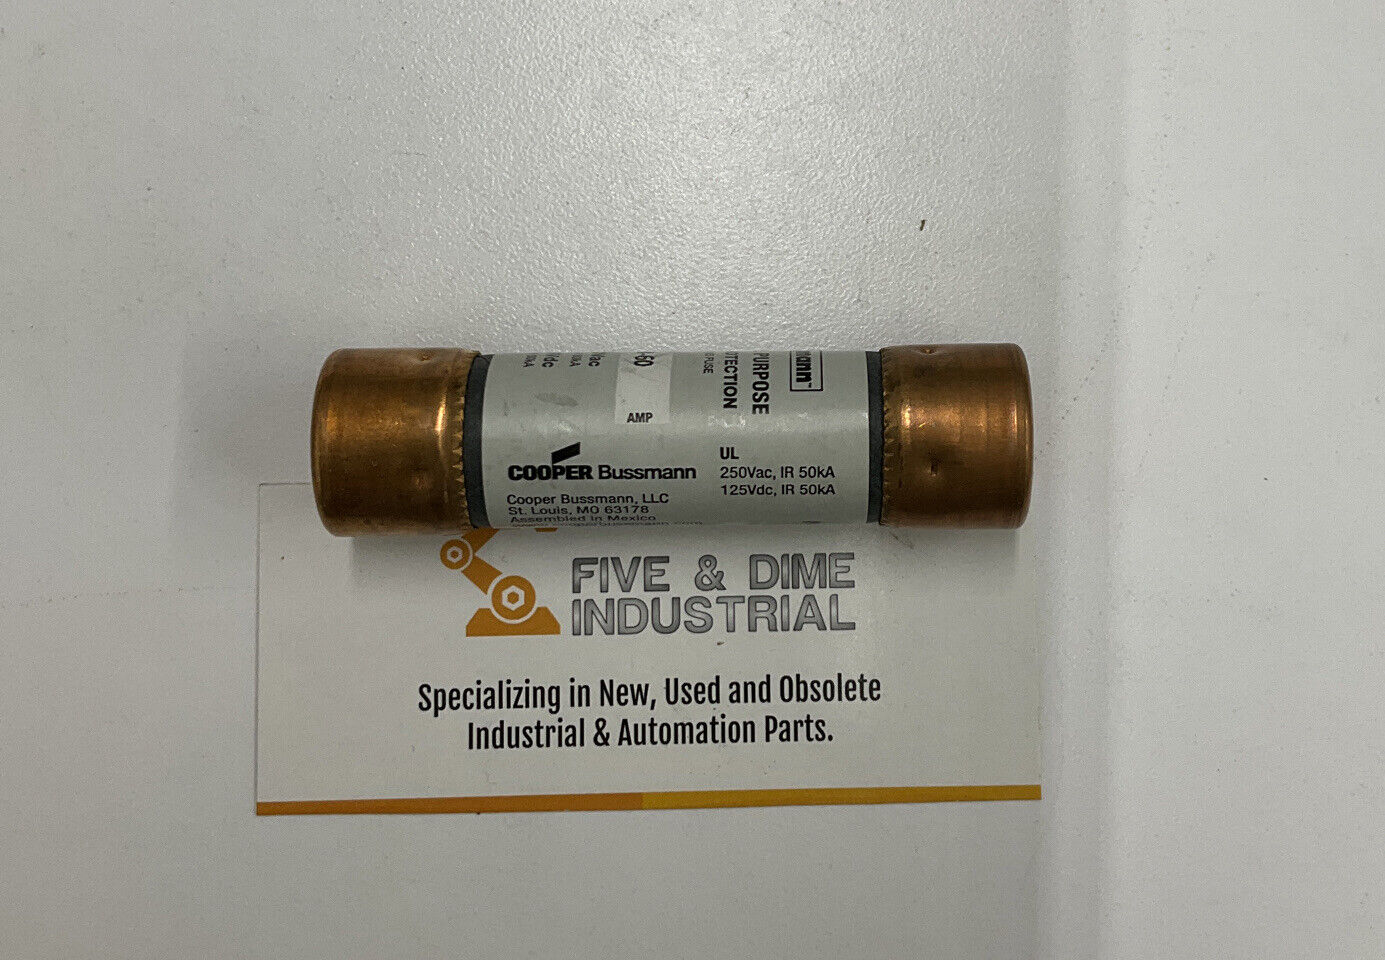 Bussmann New Lot of 2 Fuses NON-60 Series 60A 250V (CL104)